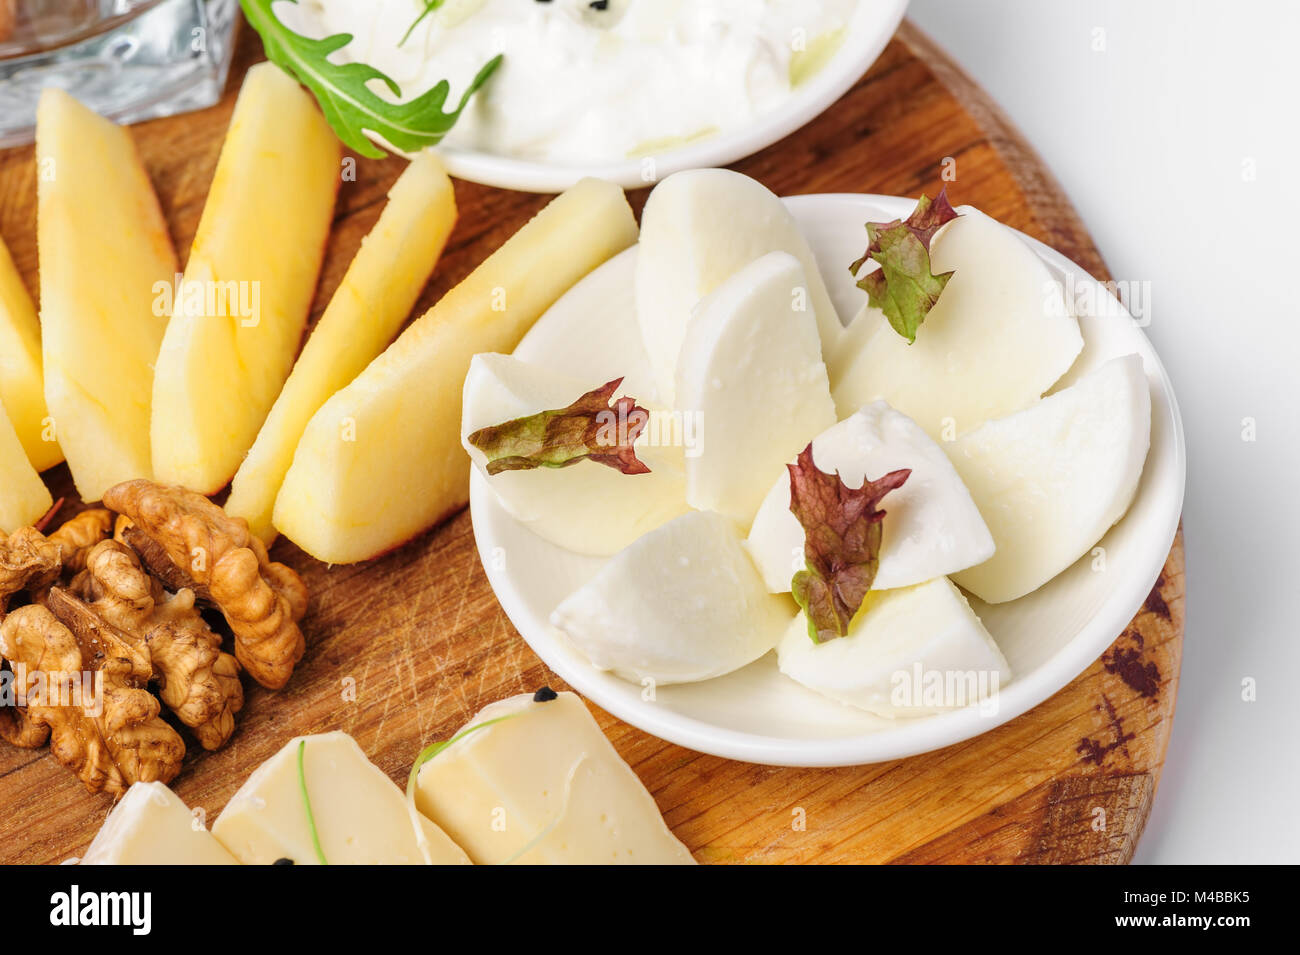 Assorted cheeses and wallnuts Stock Photo